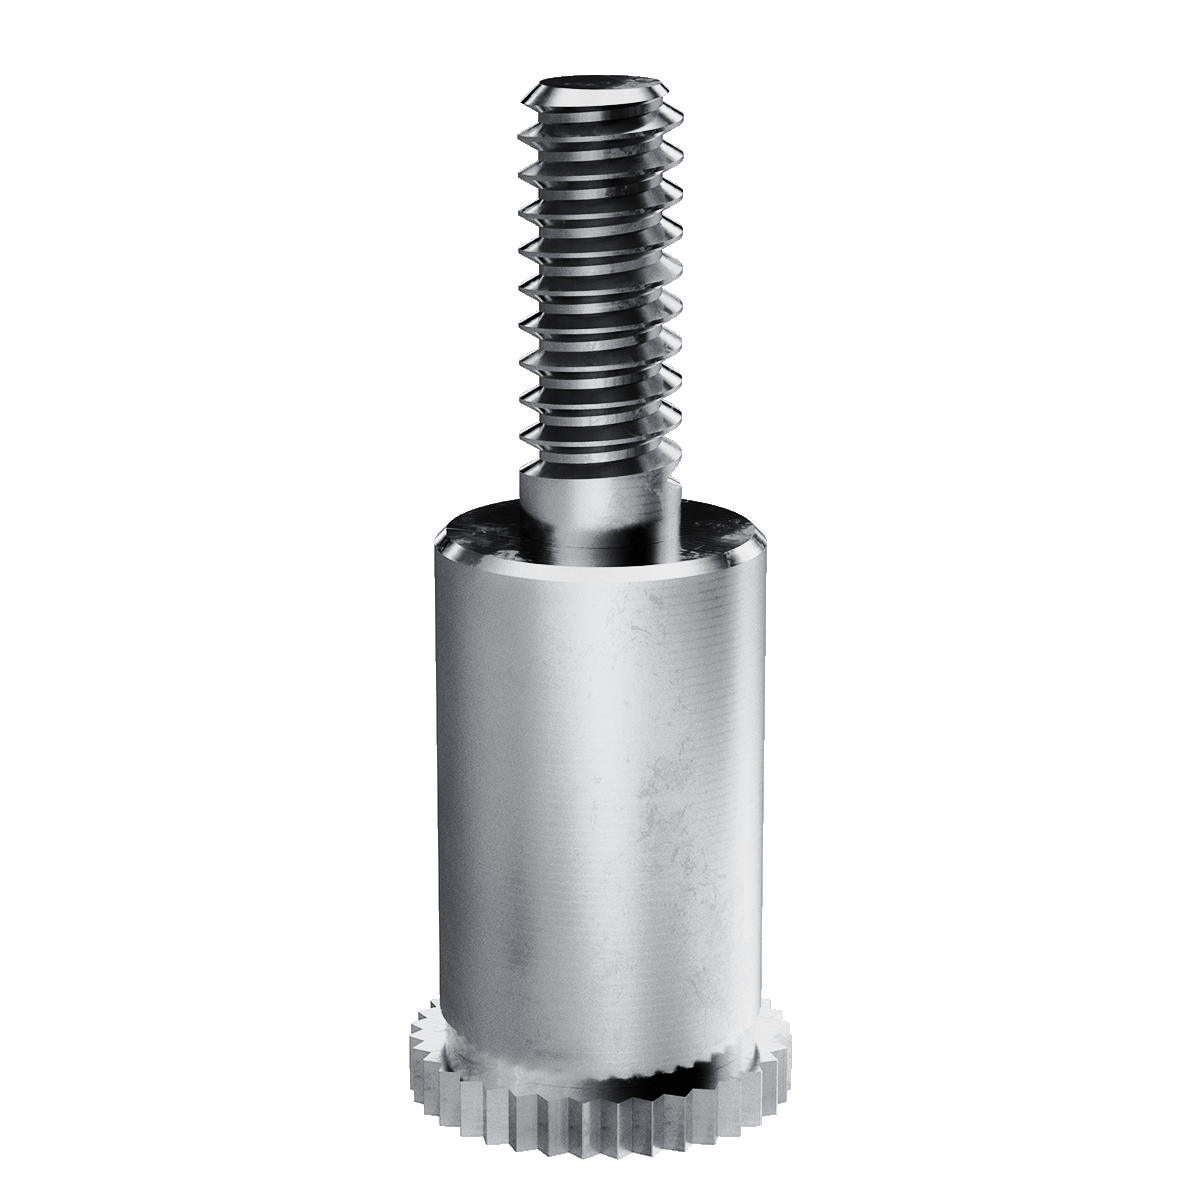 Self-Clinching Standoff, Male, Stainless Steel, Passivated, Metric, M3.5x0.6 x 12, 100 Pack